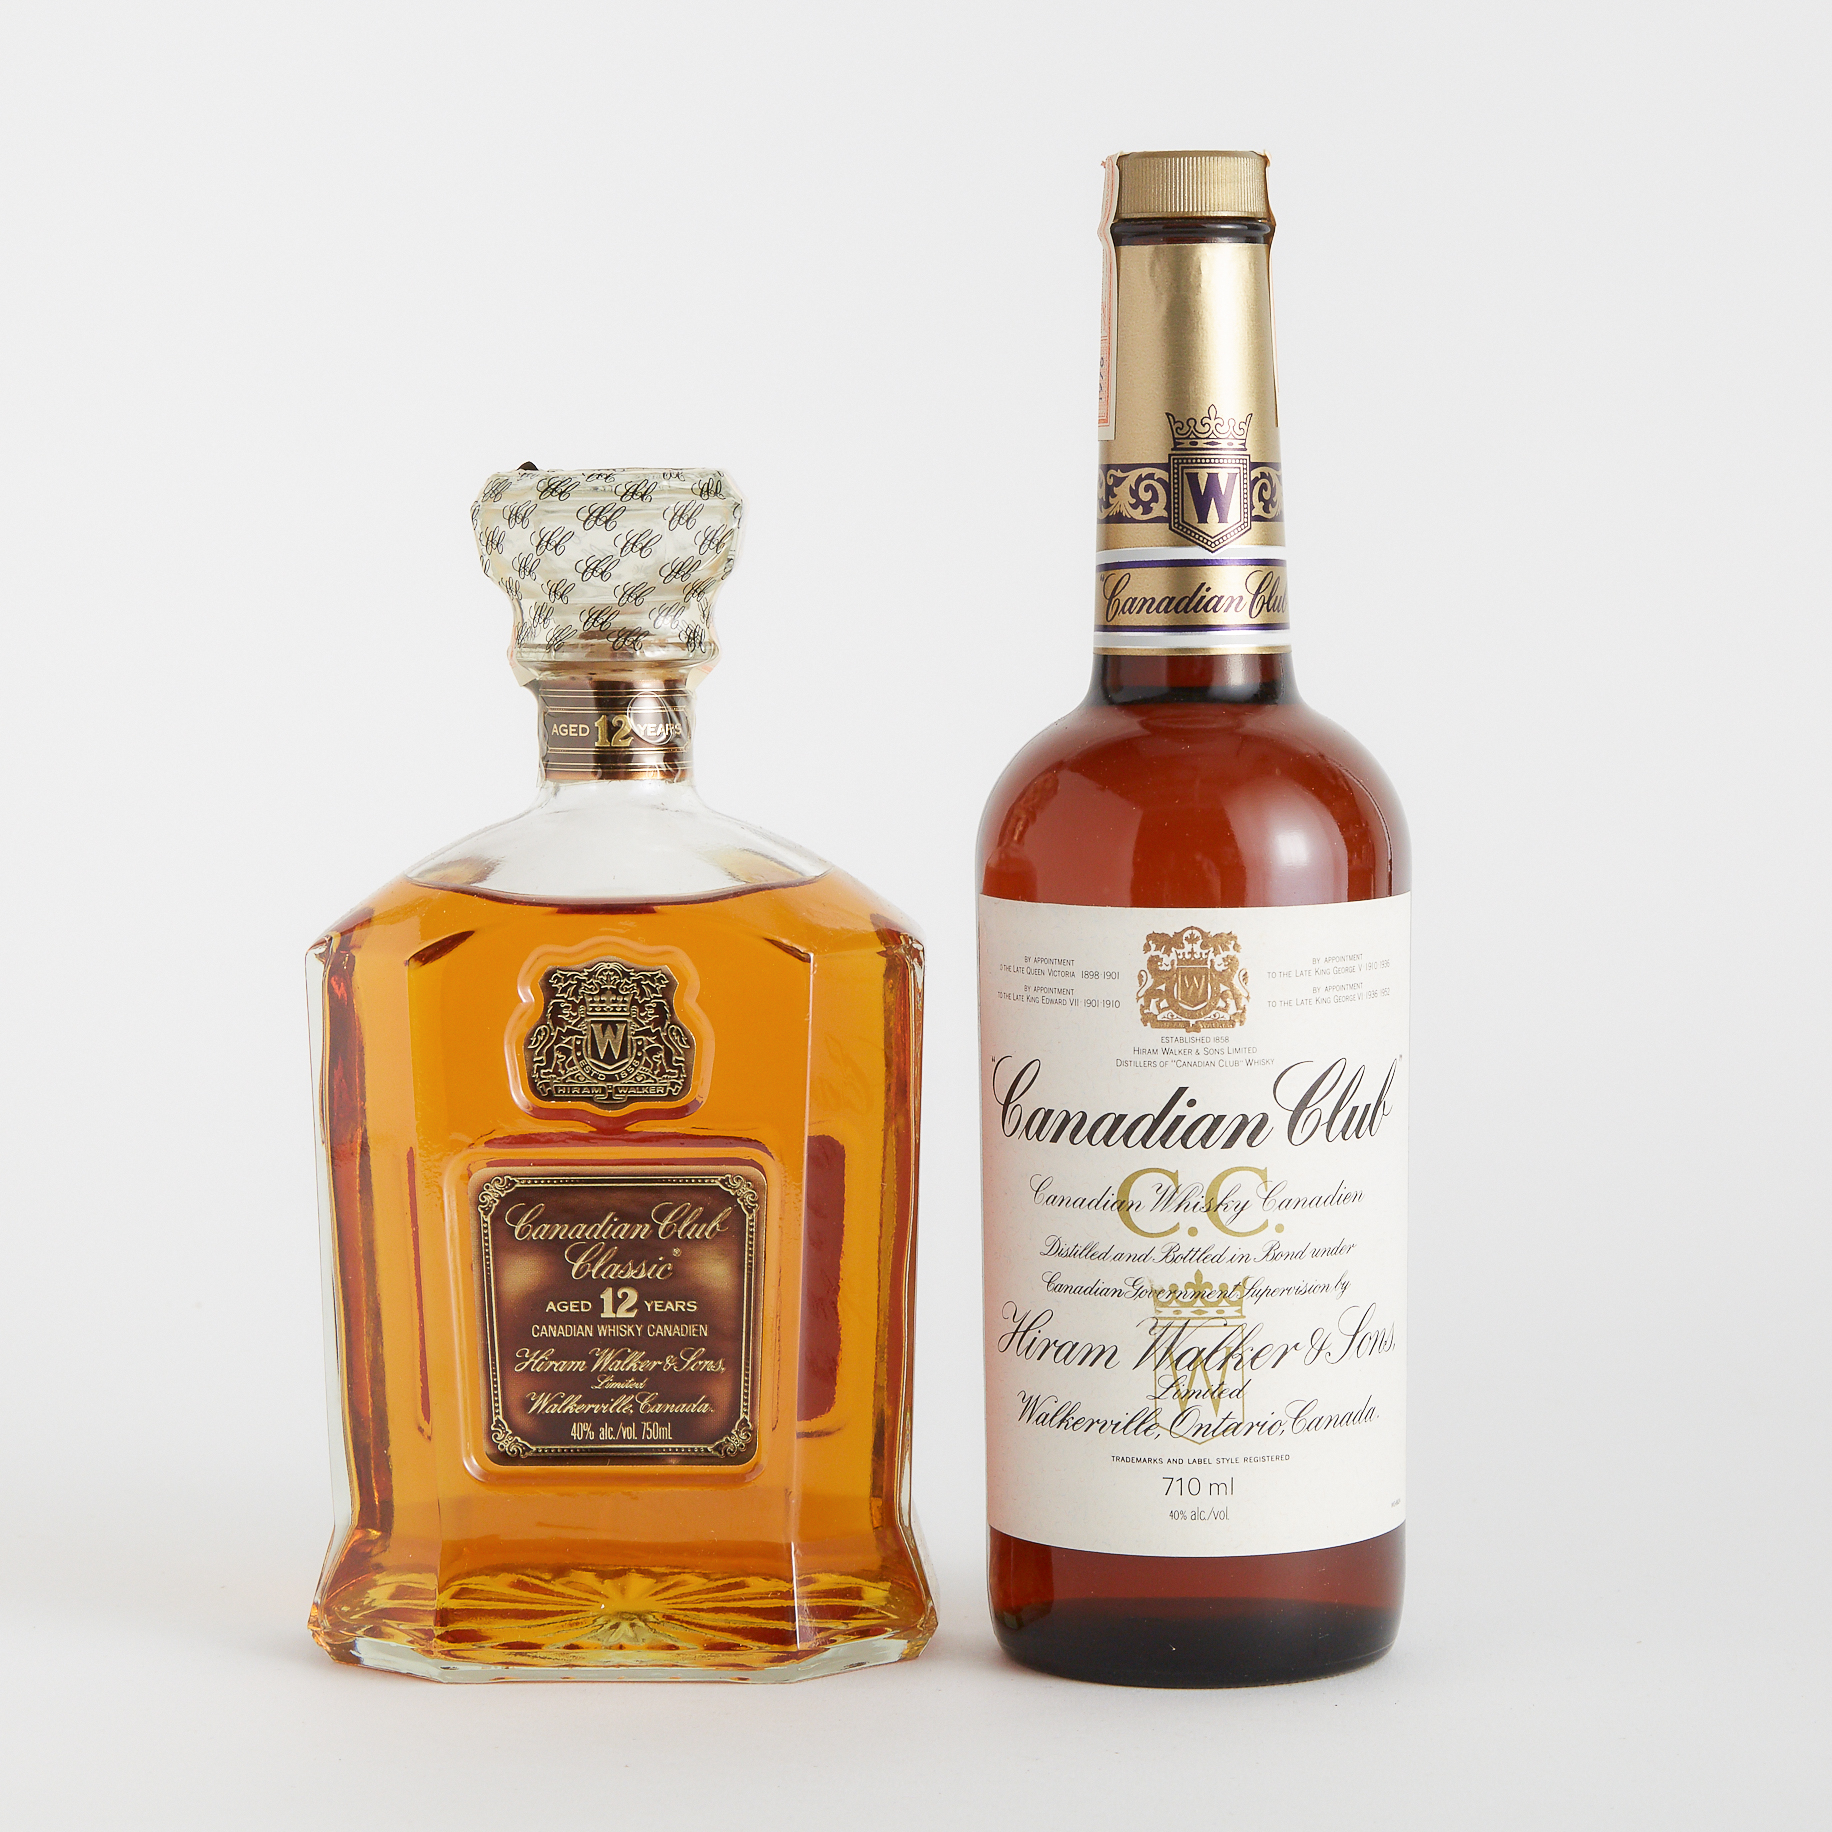 CANADIAN CLUB CANADIAN WHISKY NAS (ONE 710 ML)
CANADIAN CLUB CLASSIC CANADIAN WHISKY 12 YEARS (ONE 750 ML)